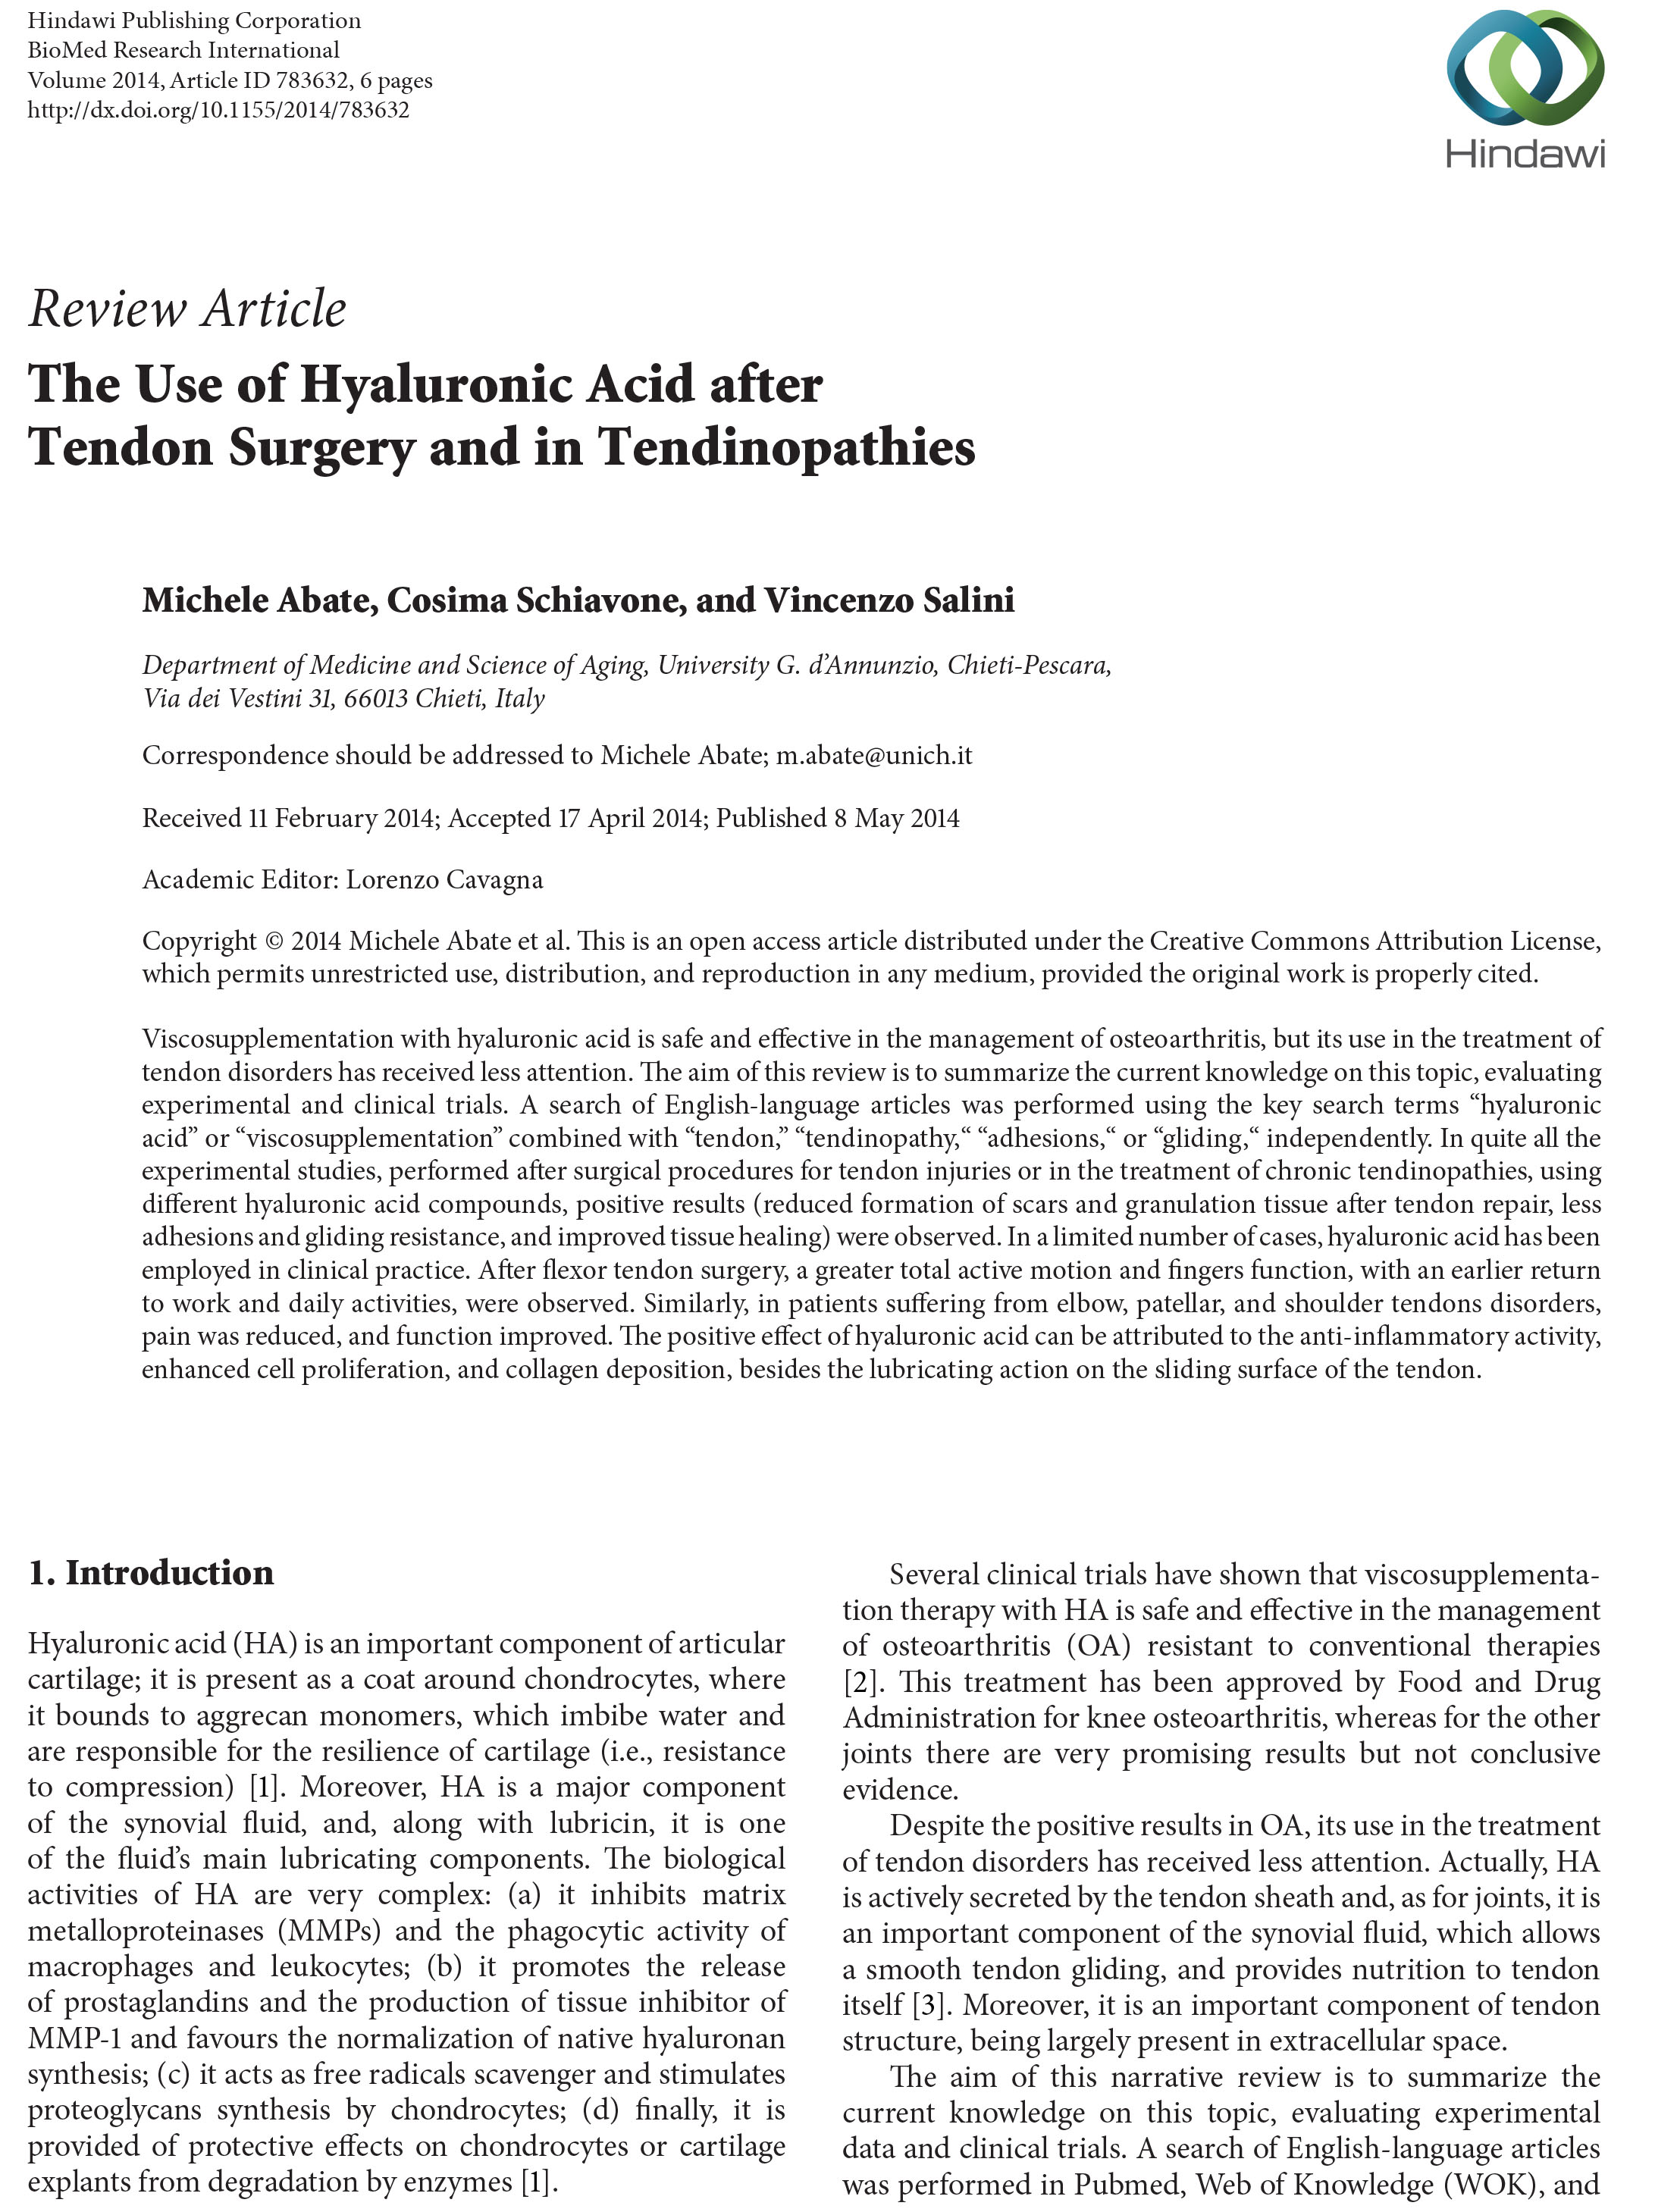 The-Use-of-Hyaluronic-Acid-after-Tendon-Surgery-and-in-Tendinopathies-1.jpg